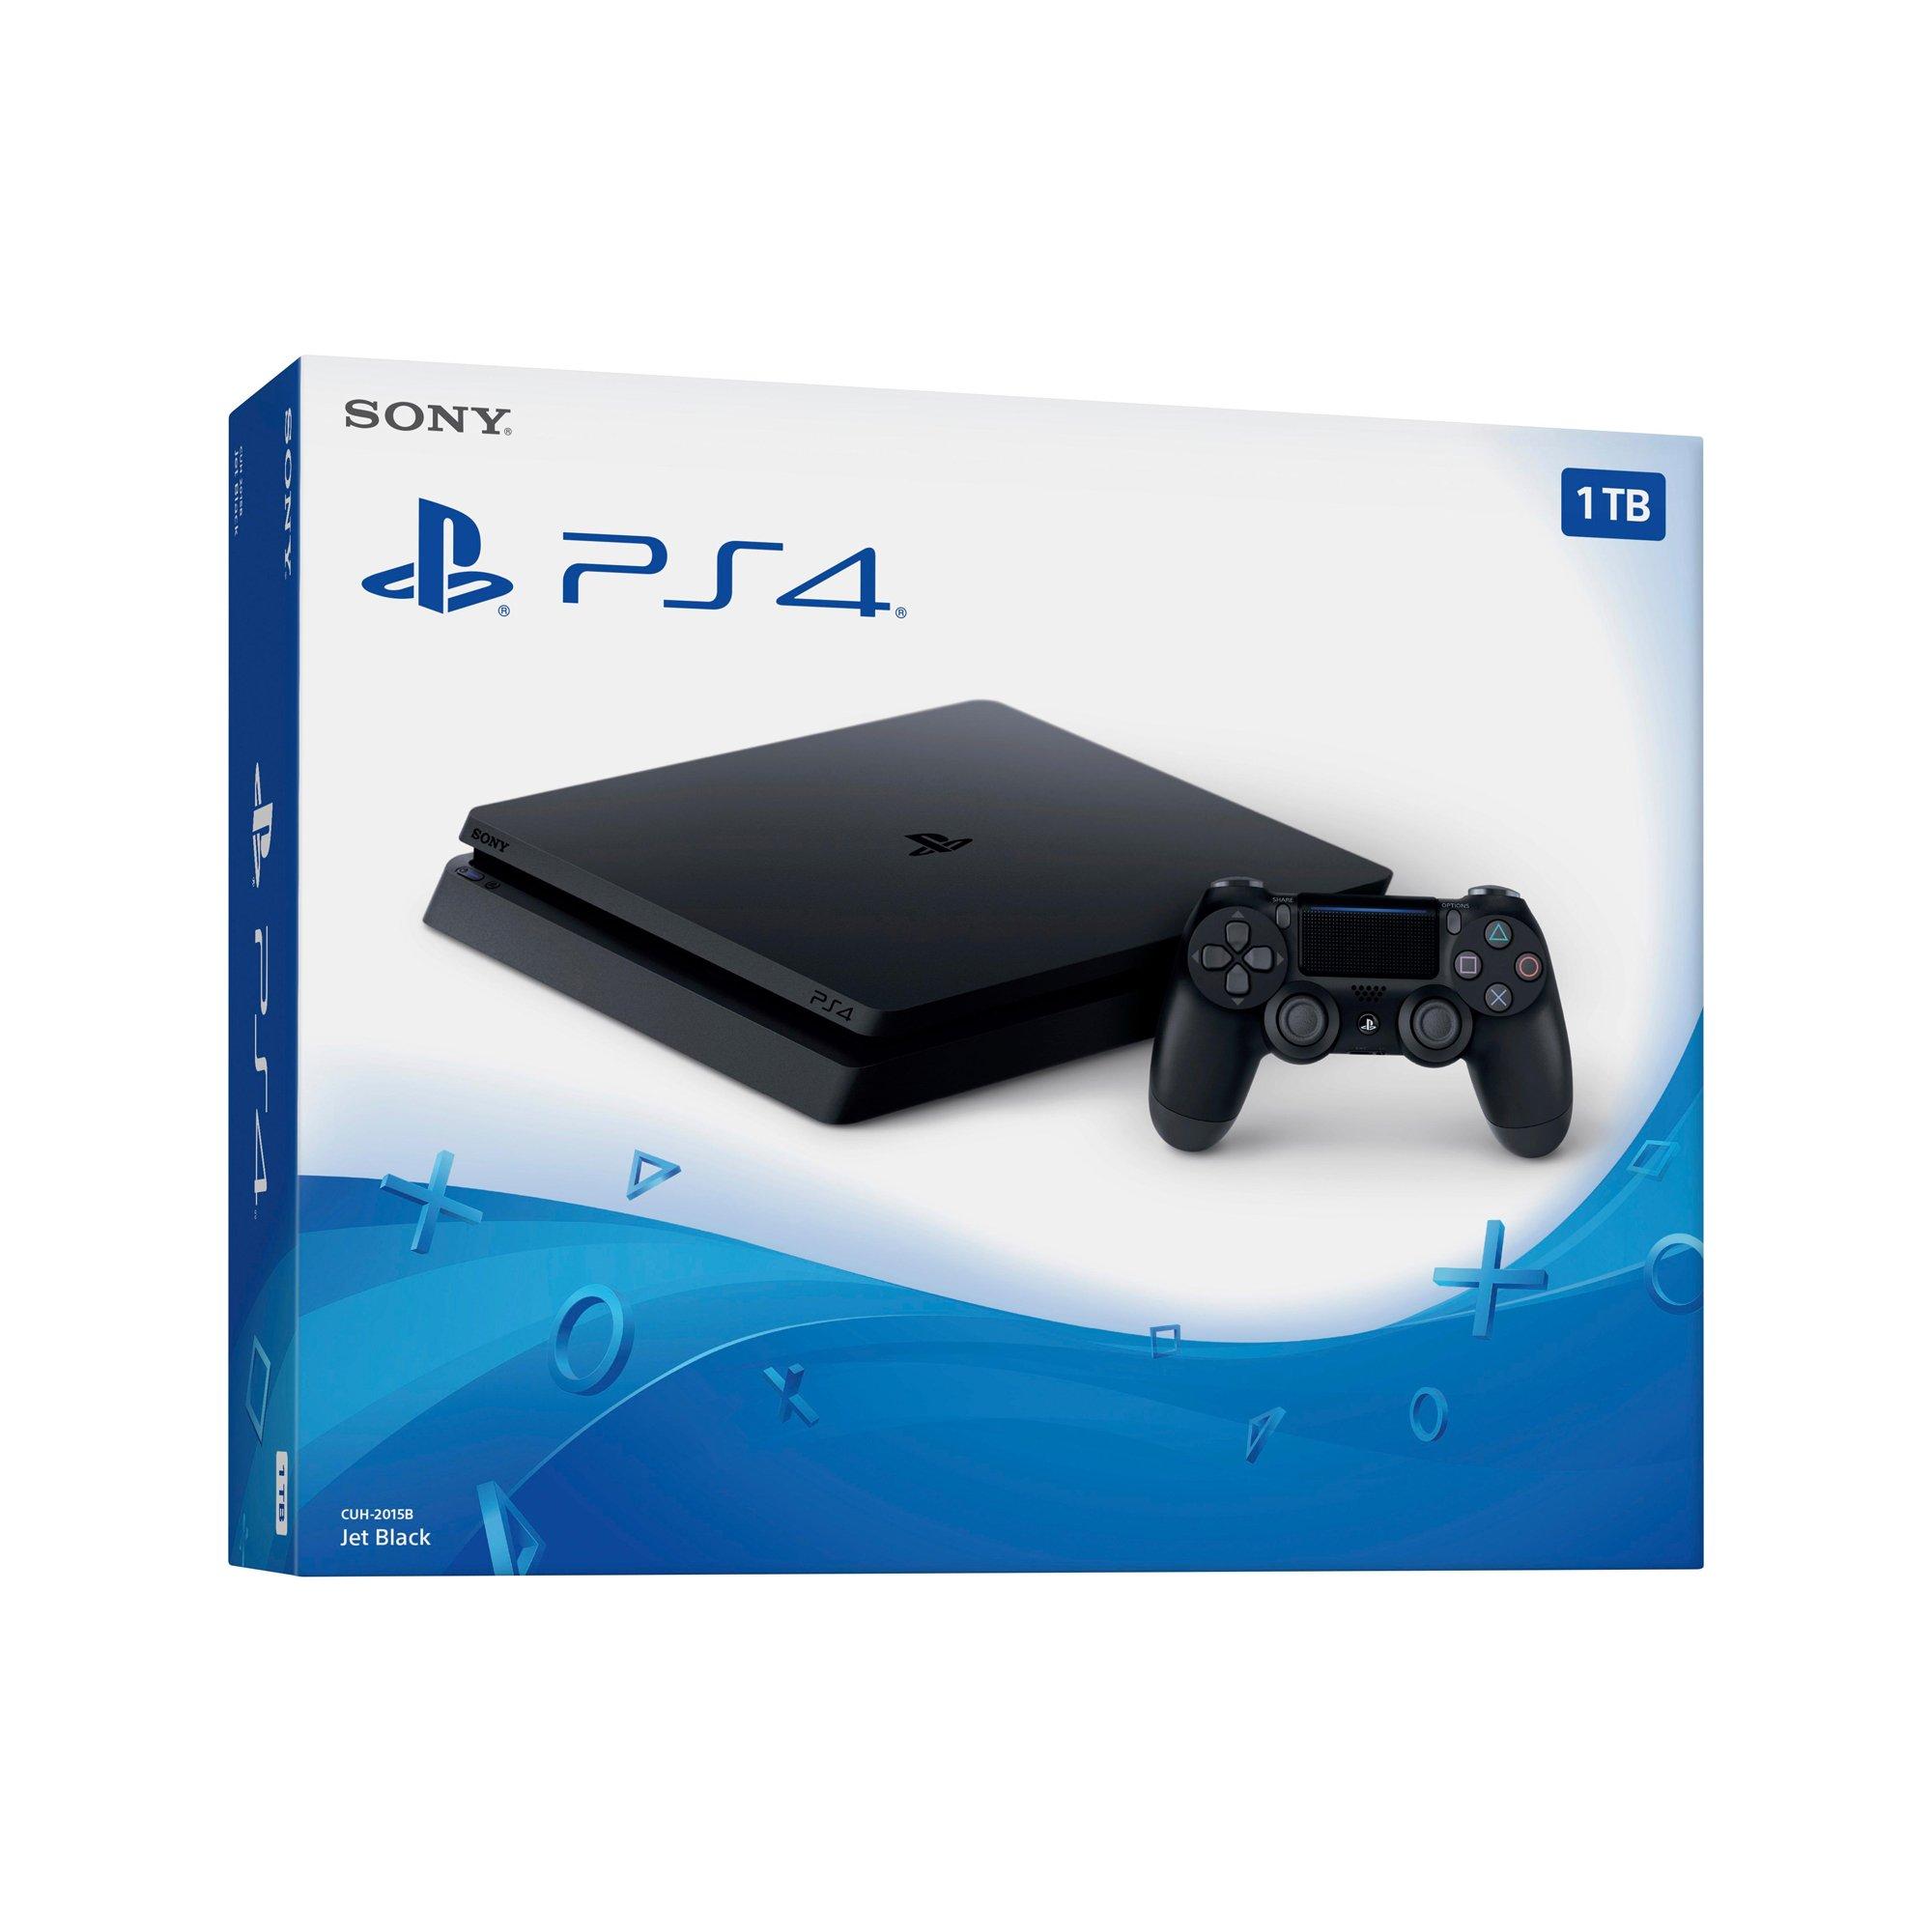 sony playstation slim 1tb system with additional dualshock 4 controller